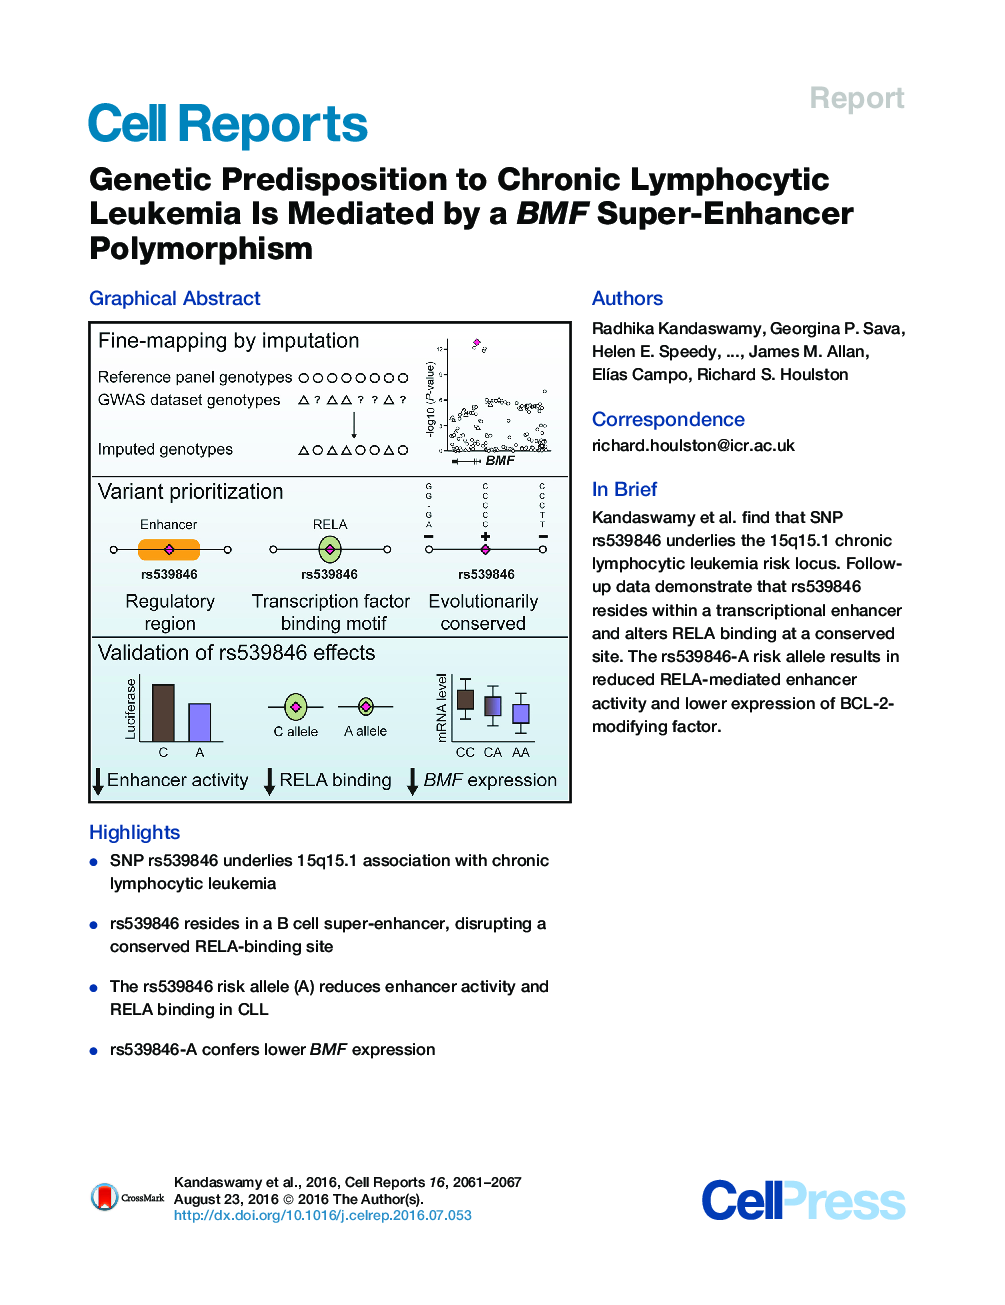 Genetic Predisposition to Chronic Lymphocytic Leukemia Is Mediated by a BMF Super-Enhancer Polymorphism